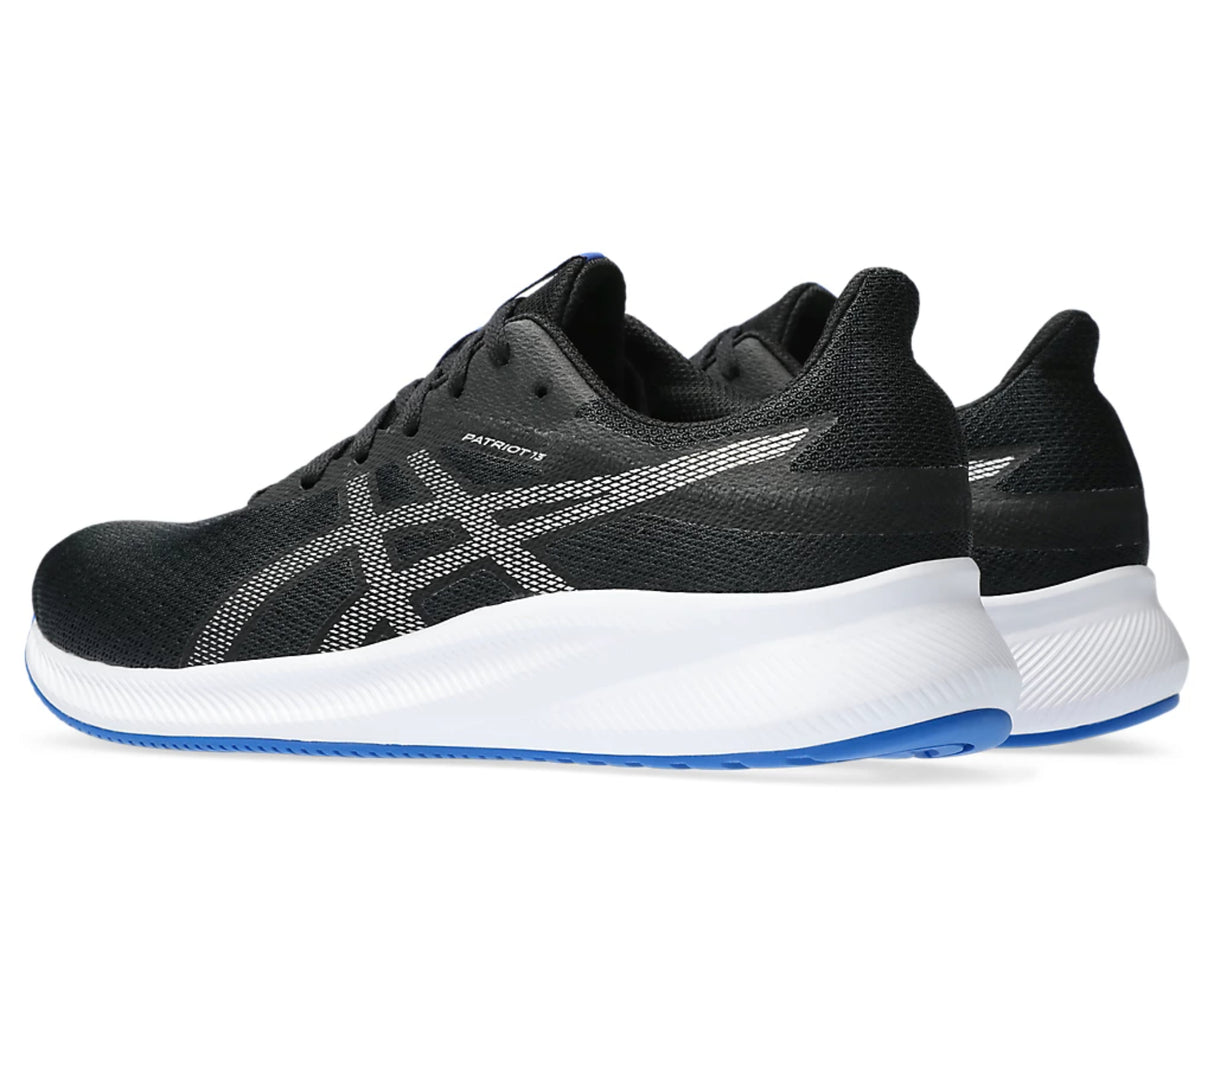 Asics PATRIOT 13 Sports Running Shoes Black/Pure Silver 1011B485.005